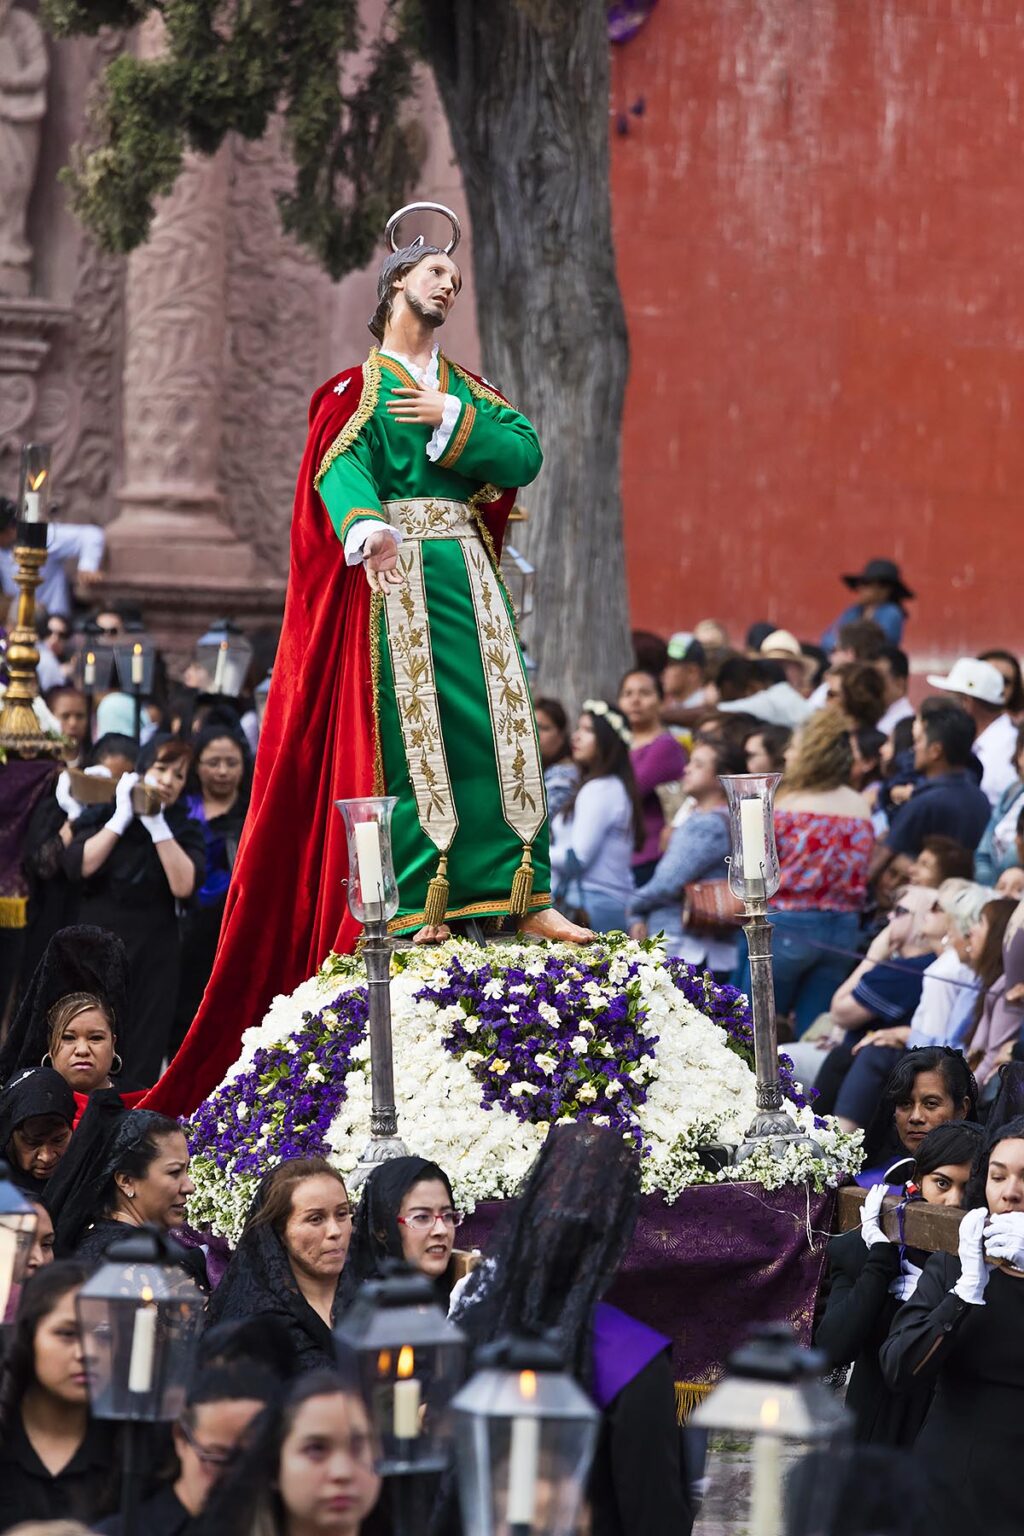 A statue of a saint is carried in the Good Friday Procession, known as the Santo Entierro, from the ORATORIO CHURCH - SAN MIGUEL DE ALLENDE, MEXICO